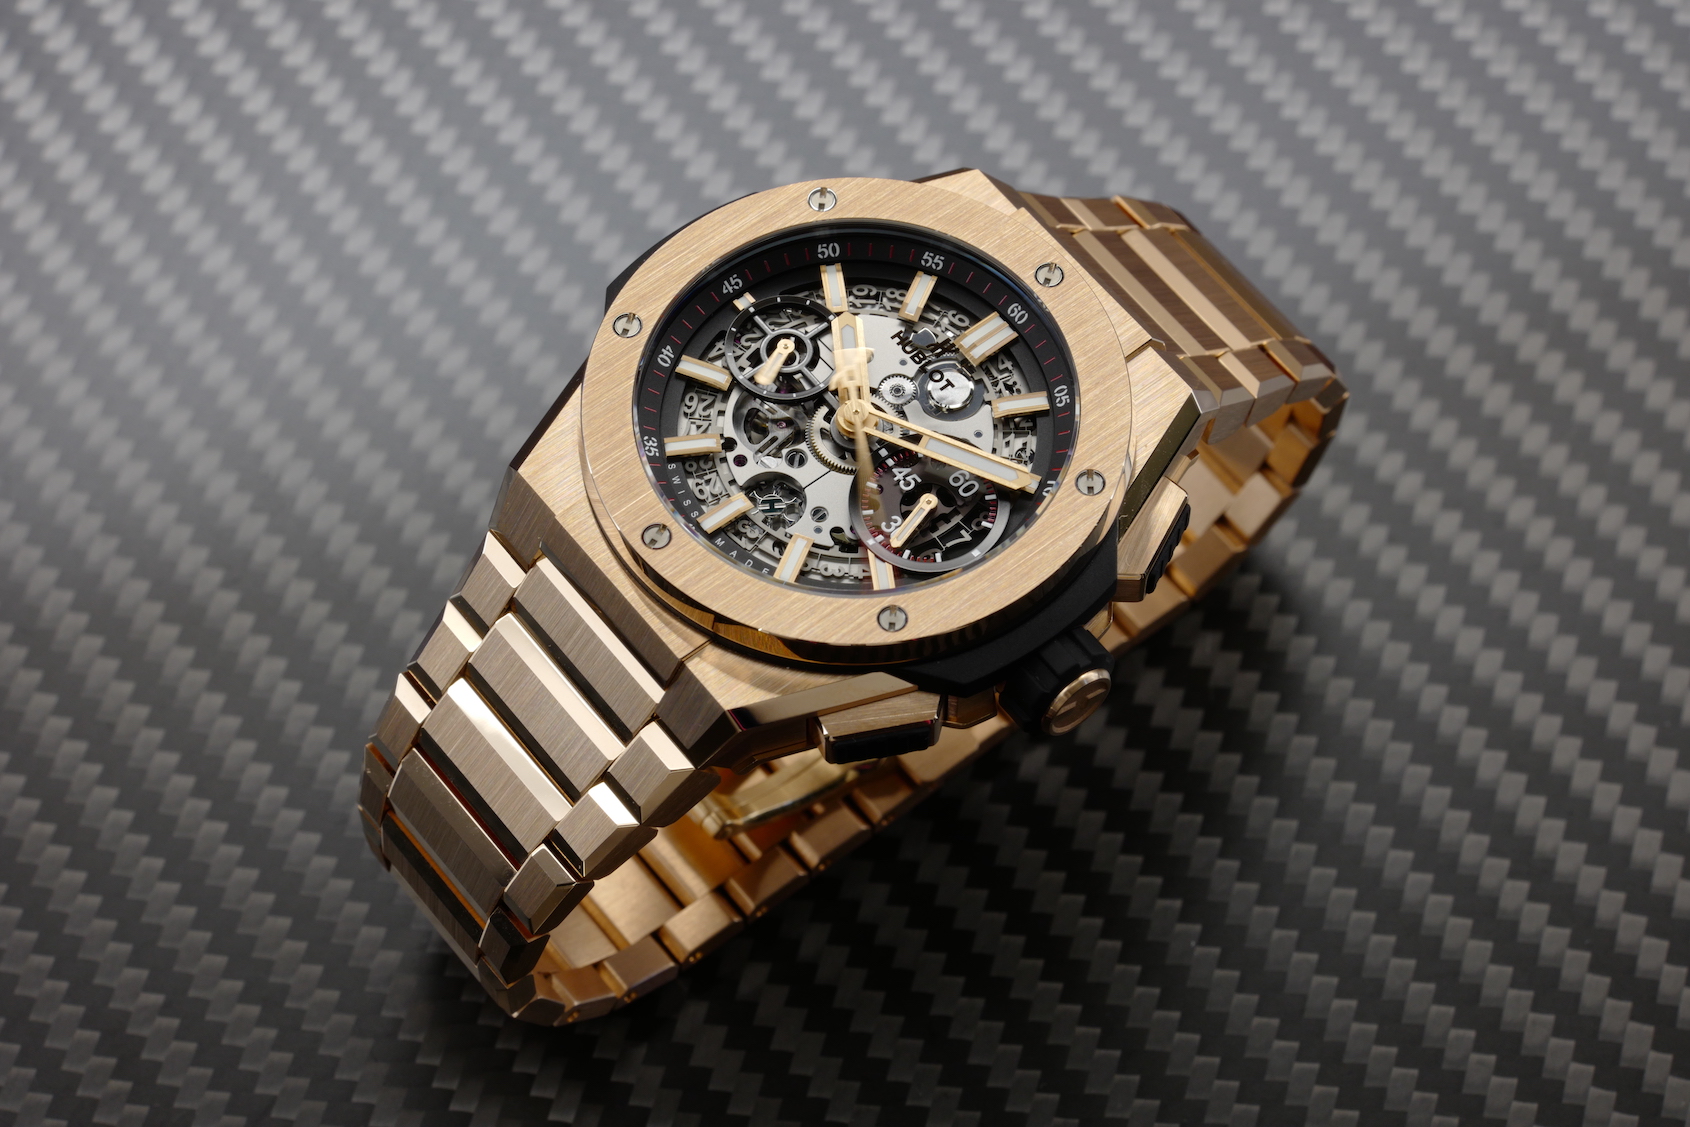 Who Dares Wins: Rolex teamed up with the SAS to create this unique Explorer II. Now you can buy it…